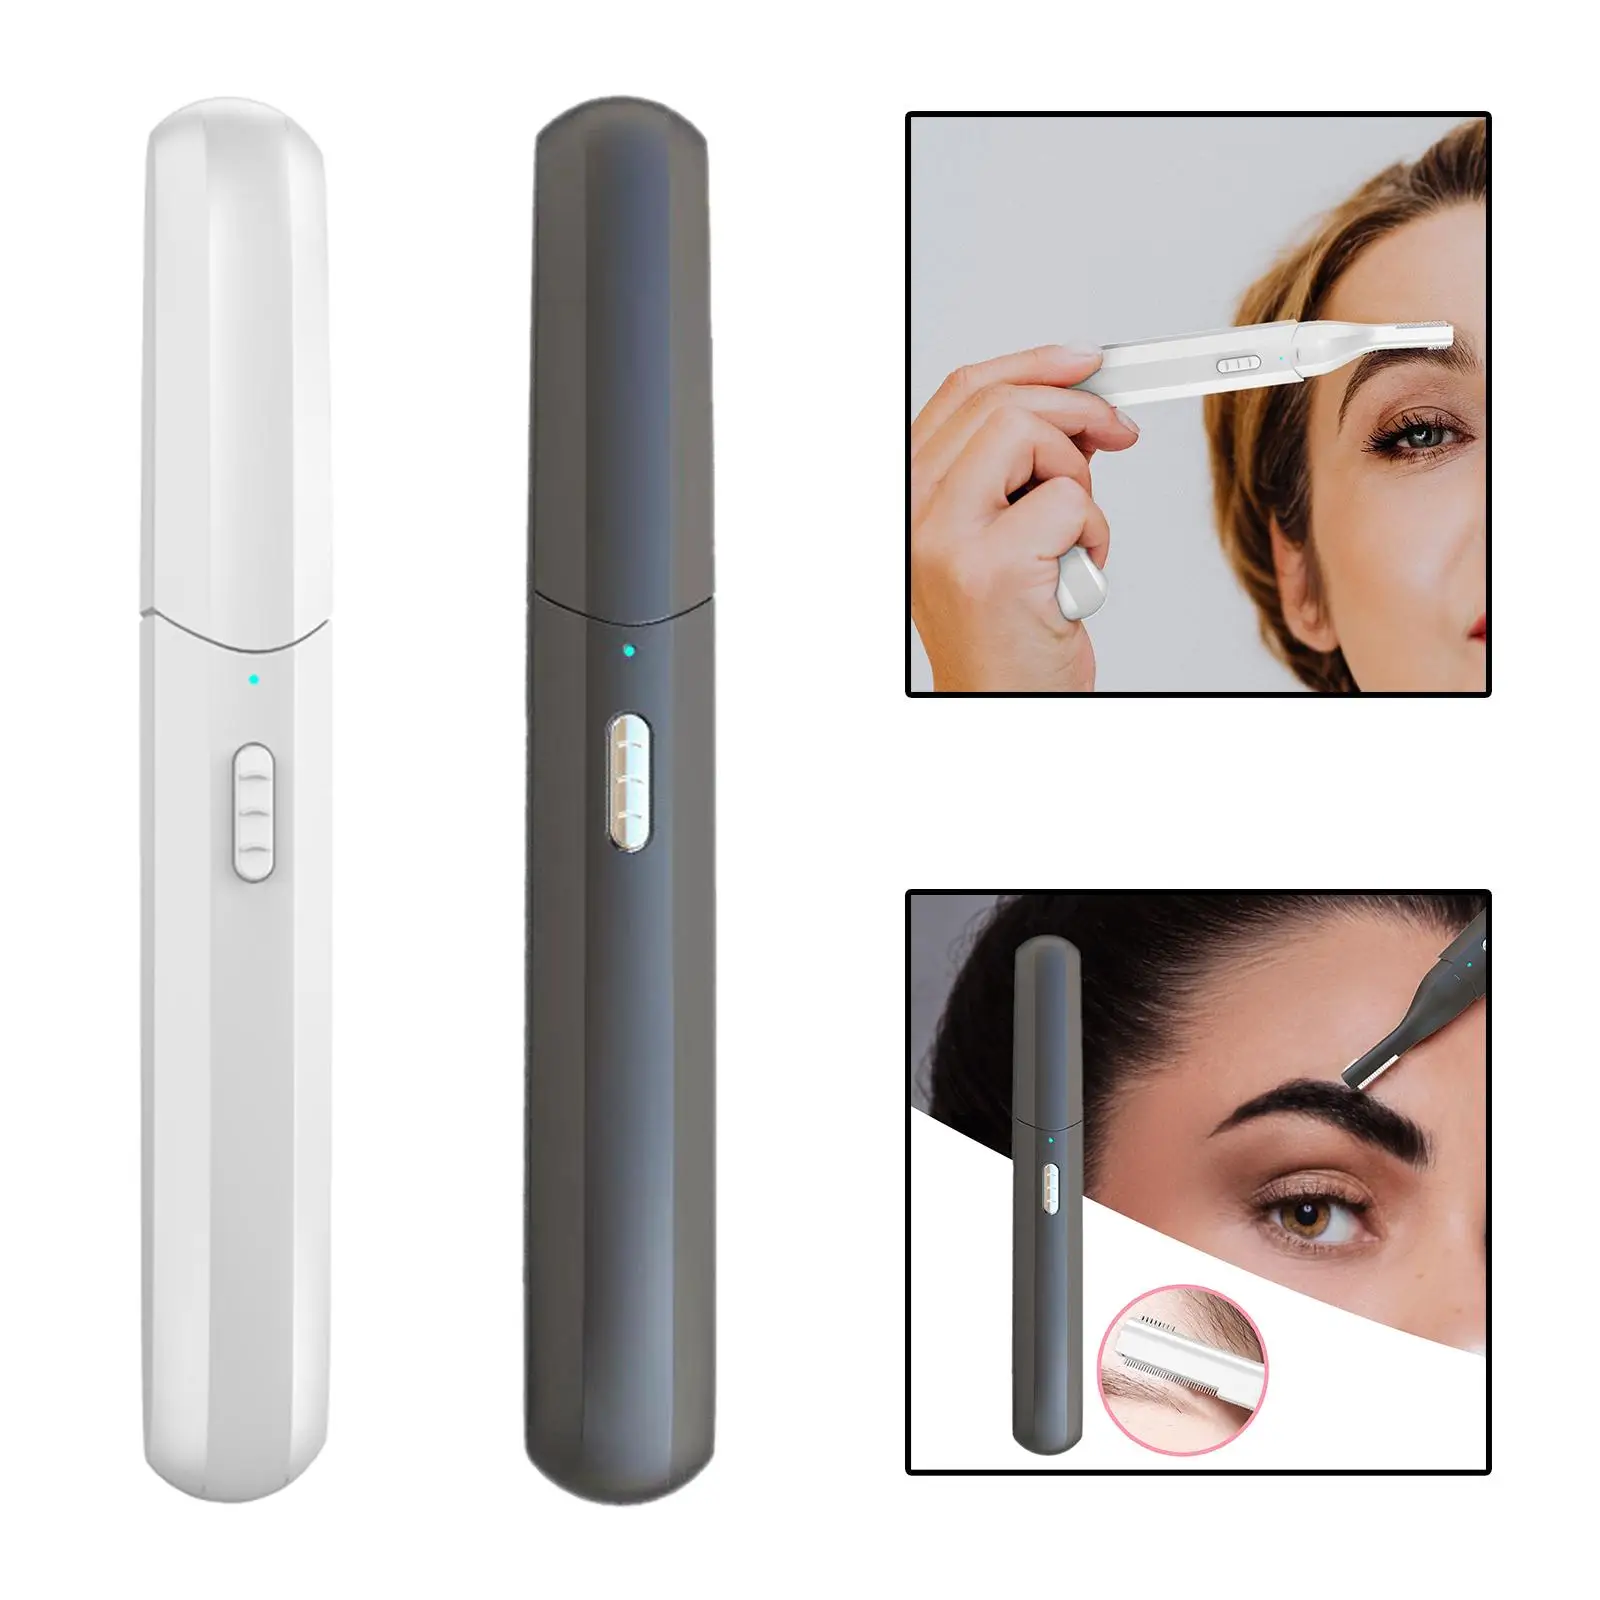 USB Charging Electric Eyebrow trimming No Pulling Hair Remover Washable Gentle Travel for Chin Armpit Arms Legs Face